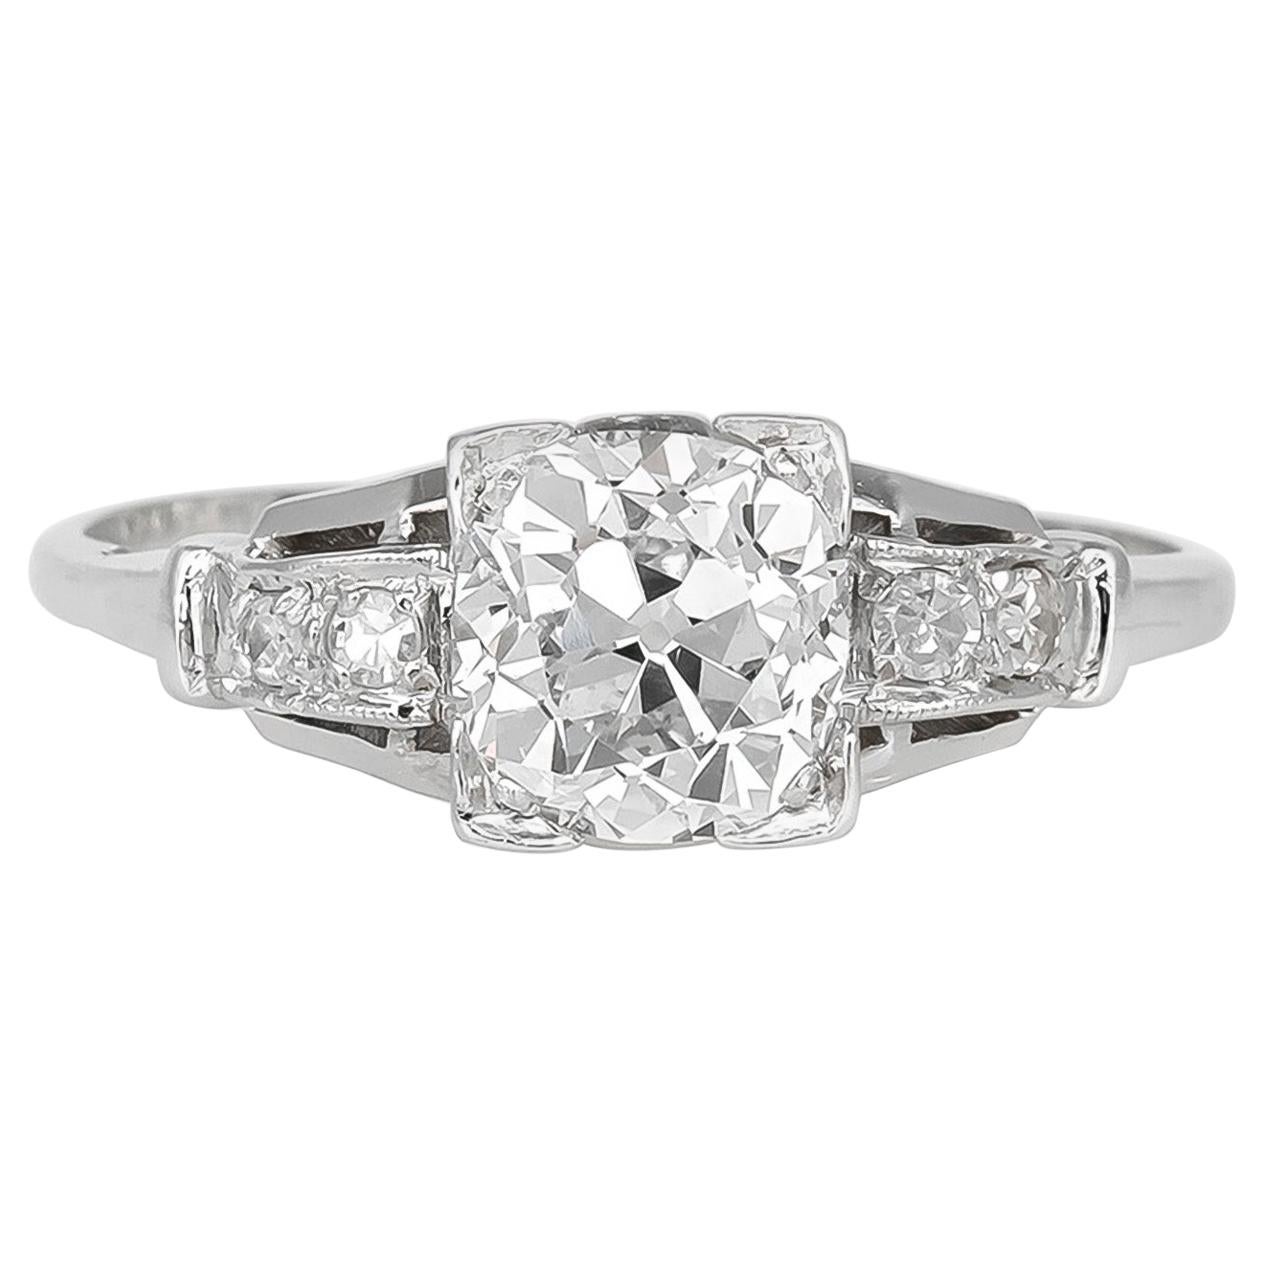 1920s-1930s GIA Platinum with Diamond Engagement Ring For Sale